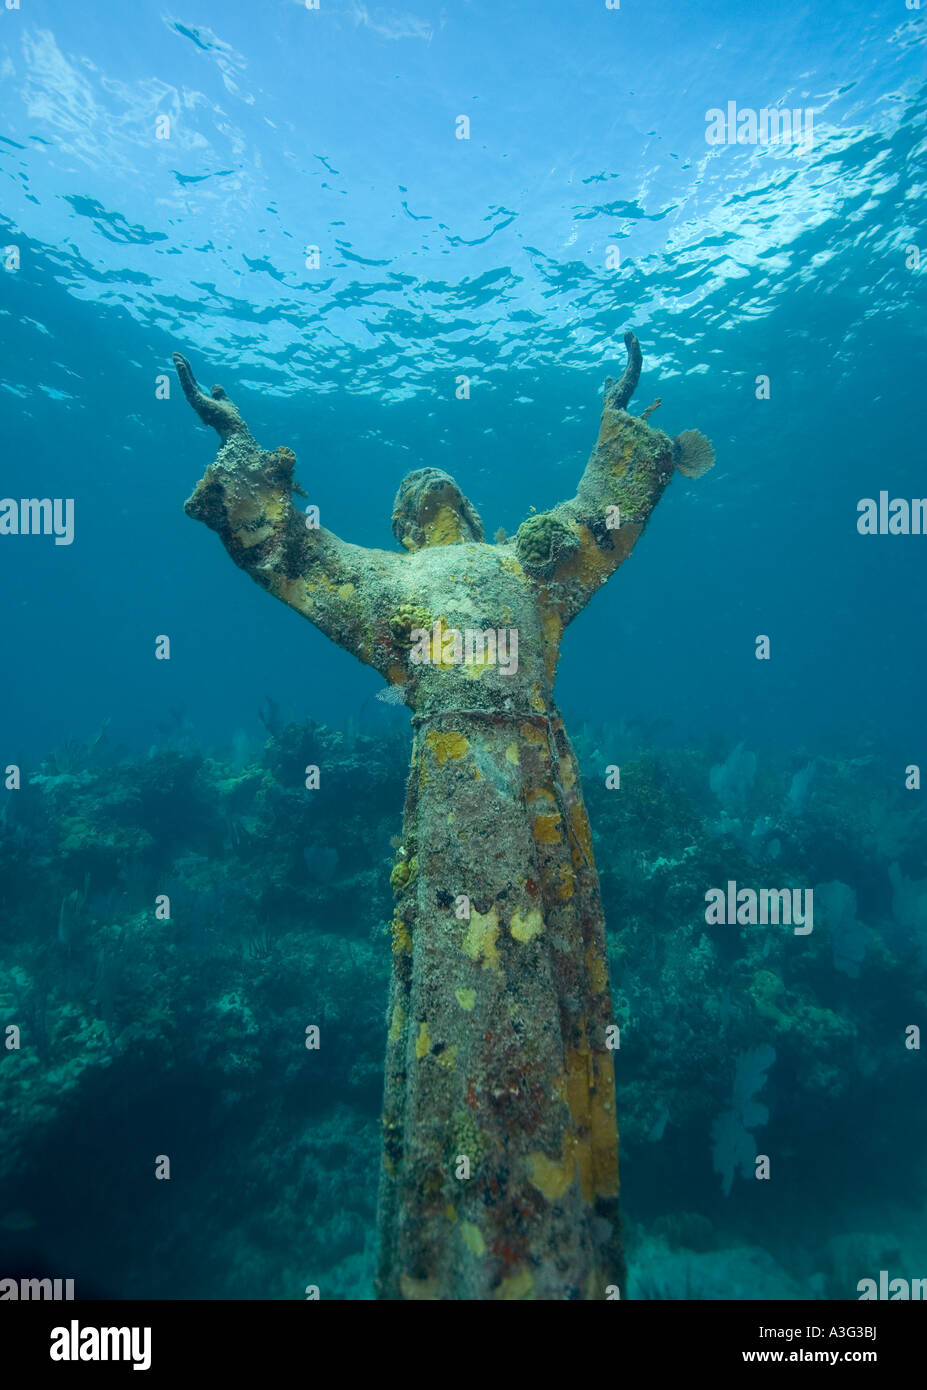 THE STATUE OF CHRIST OF THE ABYSS COMMISSIONED BY EGIDIO CRESSI RESTS NEAR KEY  LARGO DRY ROCK FLORIDA KEYS Stock Photo - Alamy